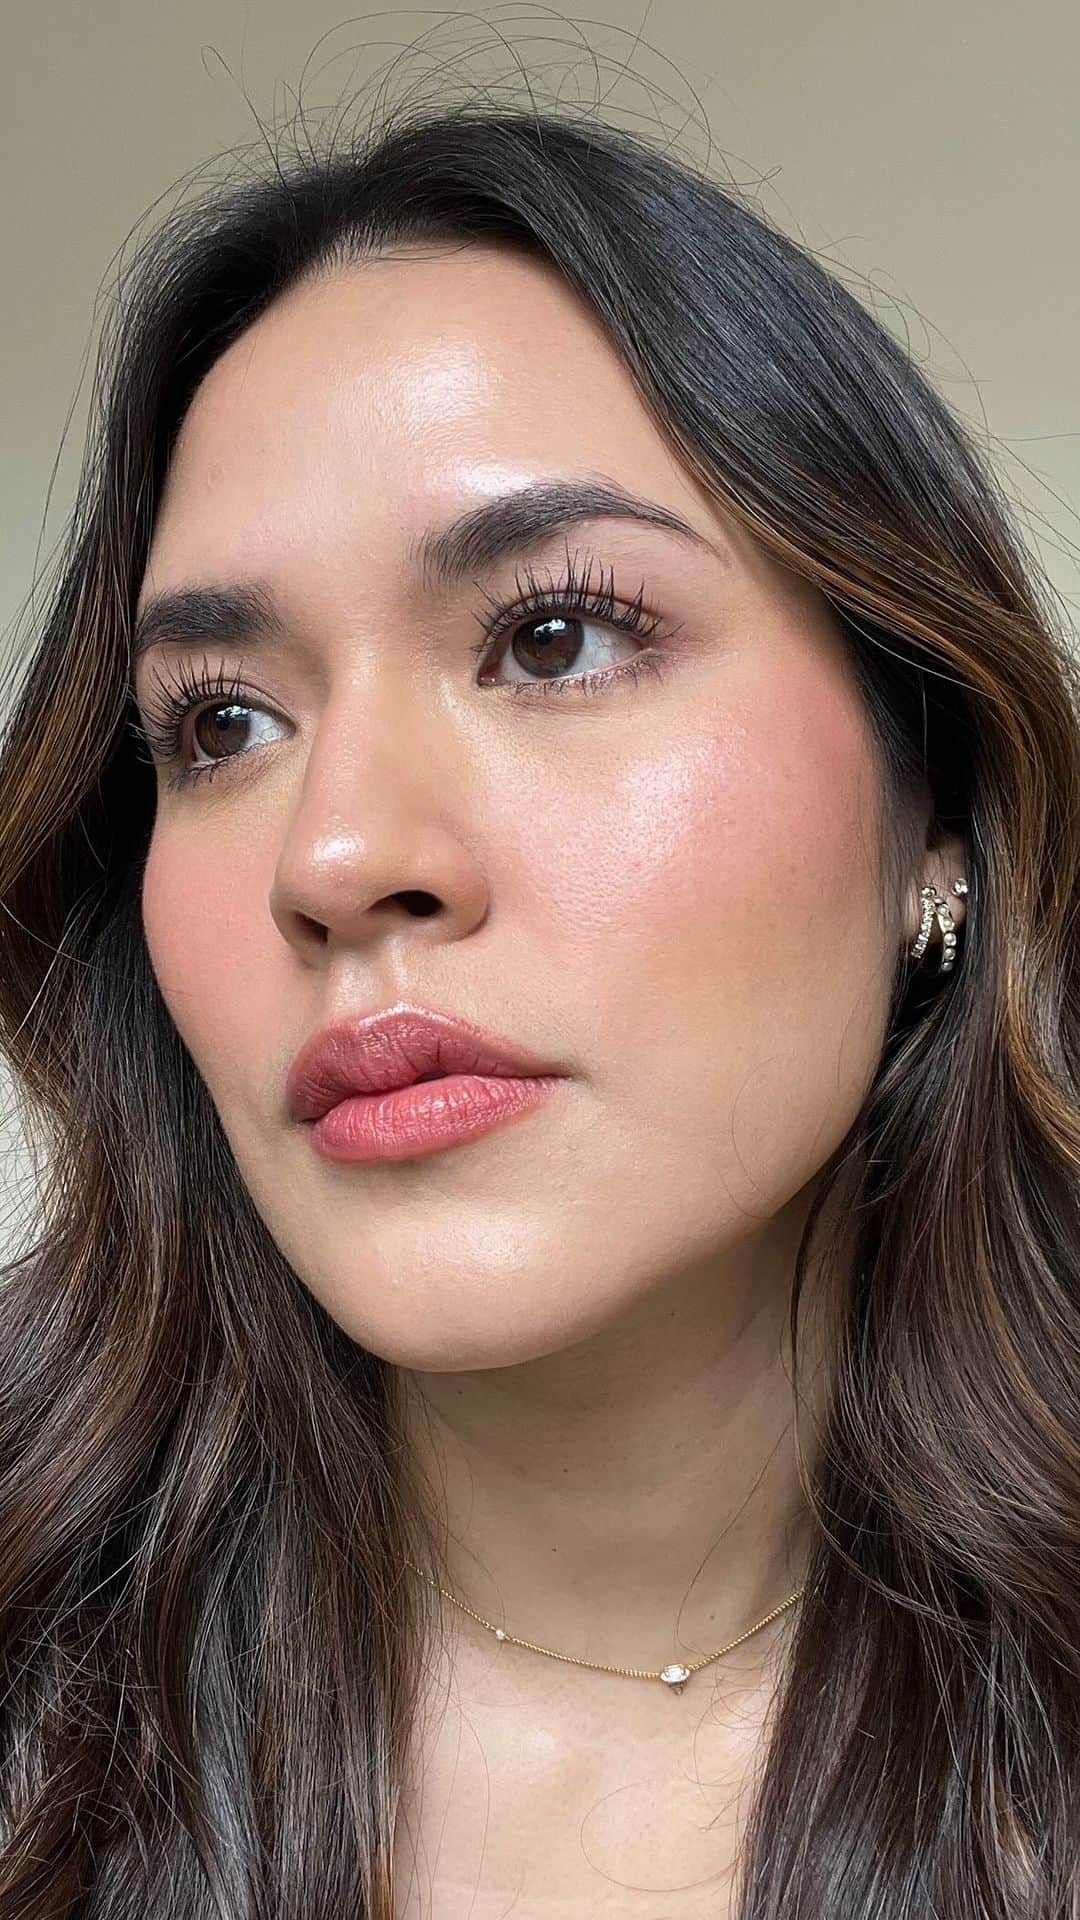 Raisa Andrianaのインスタグラム：「Step into the weekend vibes with our founder @raisa6690 as she guides us through her effortless GRWM routine for that bare-but-better look ✨  @raisa6690 wears:  The Daily Skin Drops in shade Light Medium Soft Cheek Color Drops in shade I’m in The Mood Lip Velvet Hydrating Balm in shade Gentle Light  Ready to slay this weekend? Drop a '💖' if you are!  (*)Psst.. exciting news! Our best selling Soft Cheek Color Drops in shade I'm in The Mood is finally back in stock, go get yours now! 🛍️  #LoveAtFirstDrop #RaineBeauty #ConsciousBeauty」